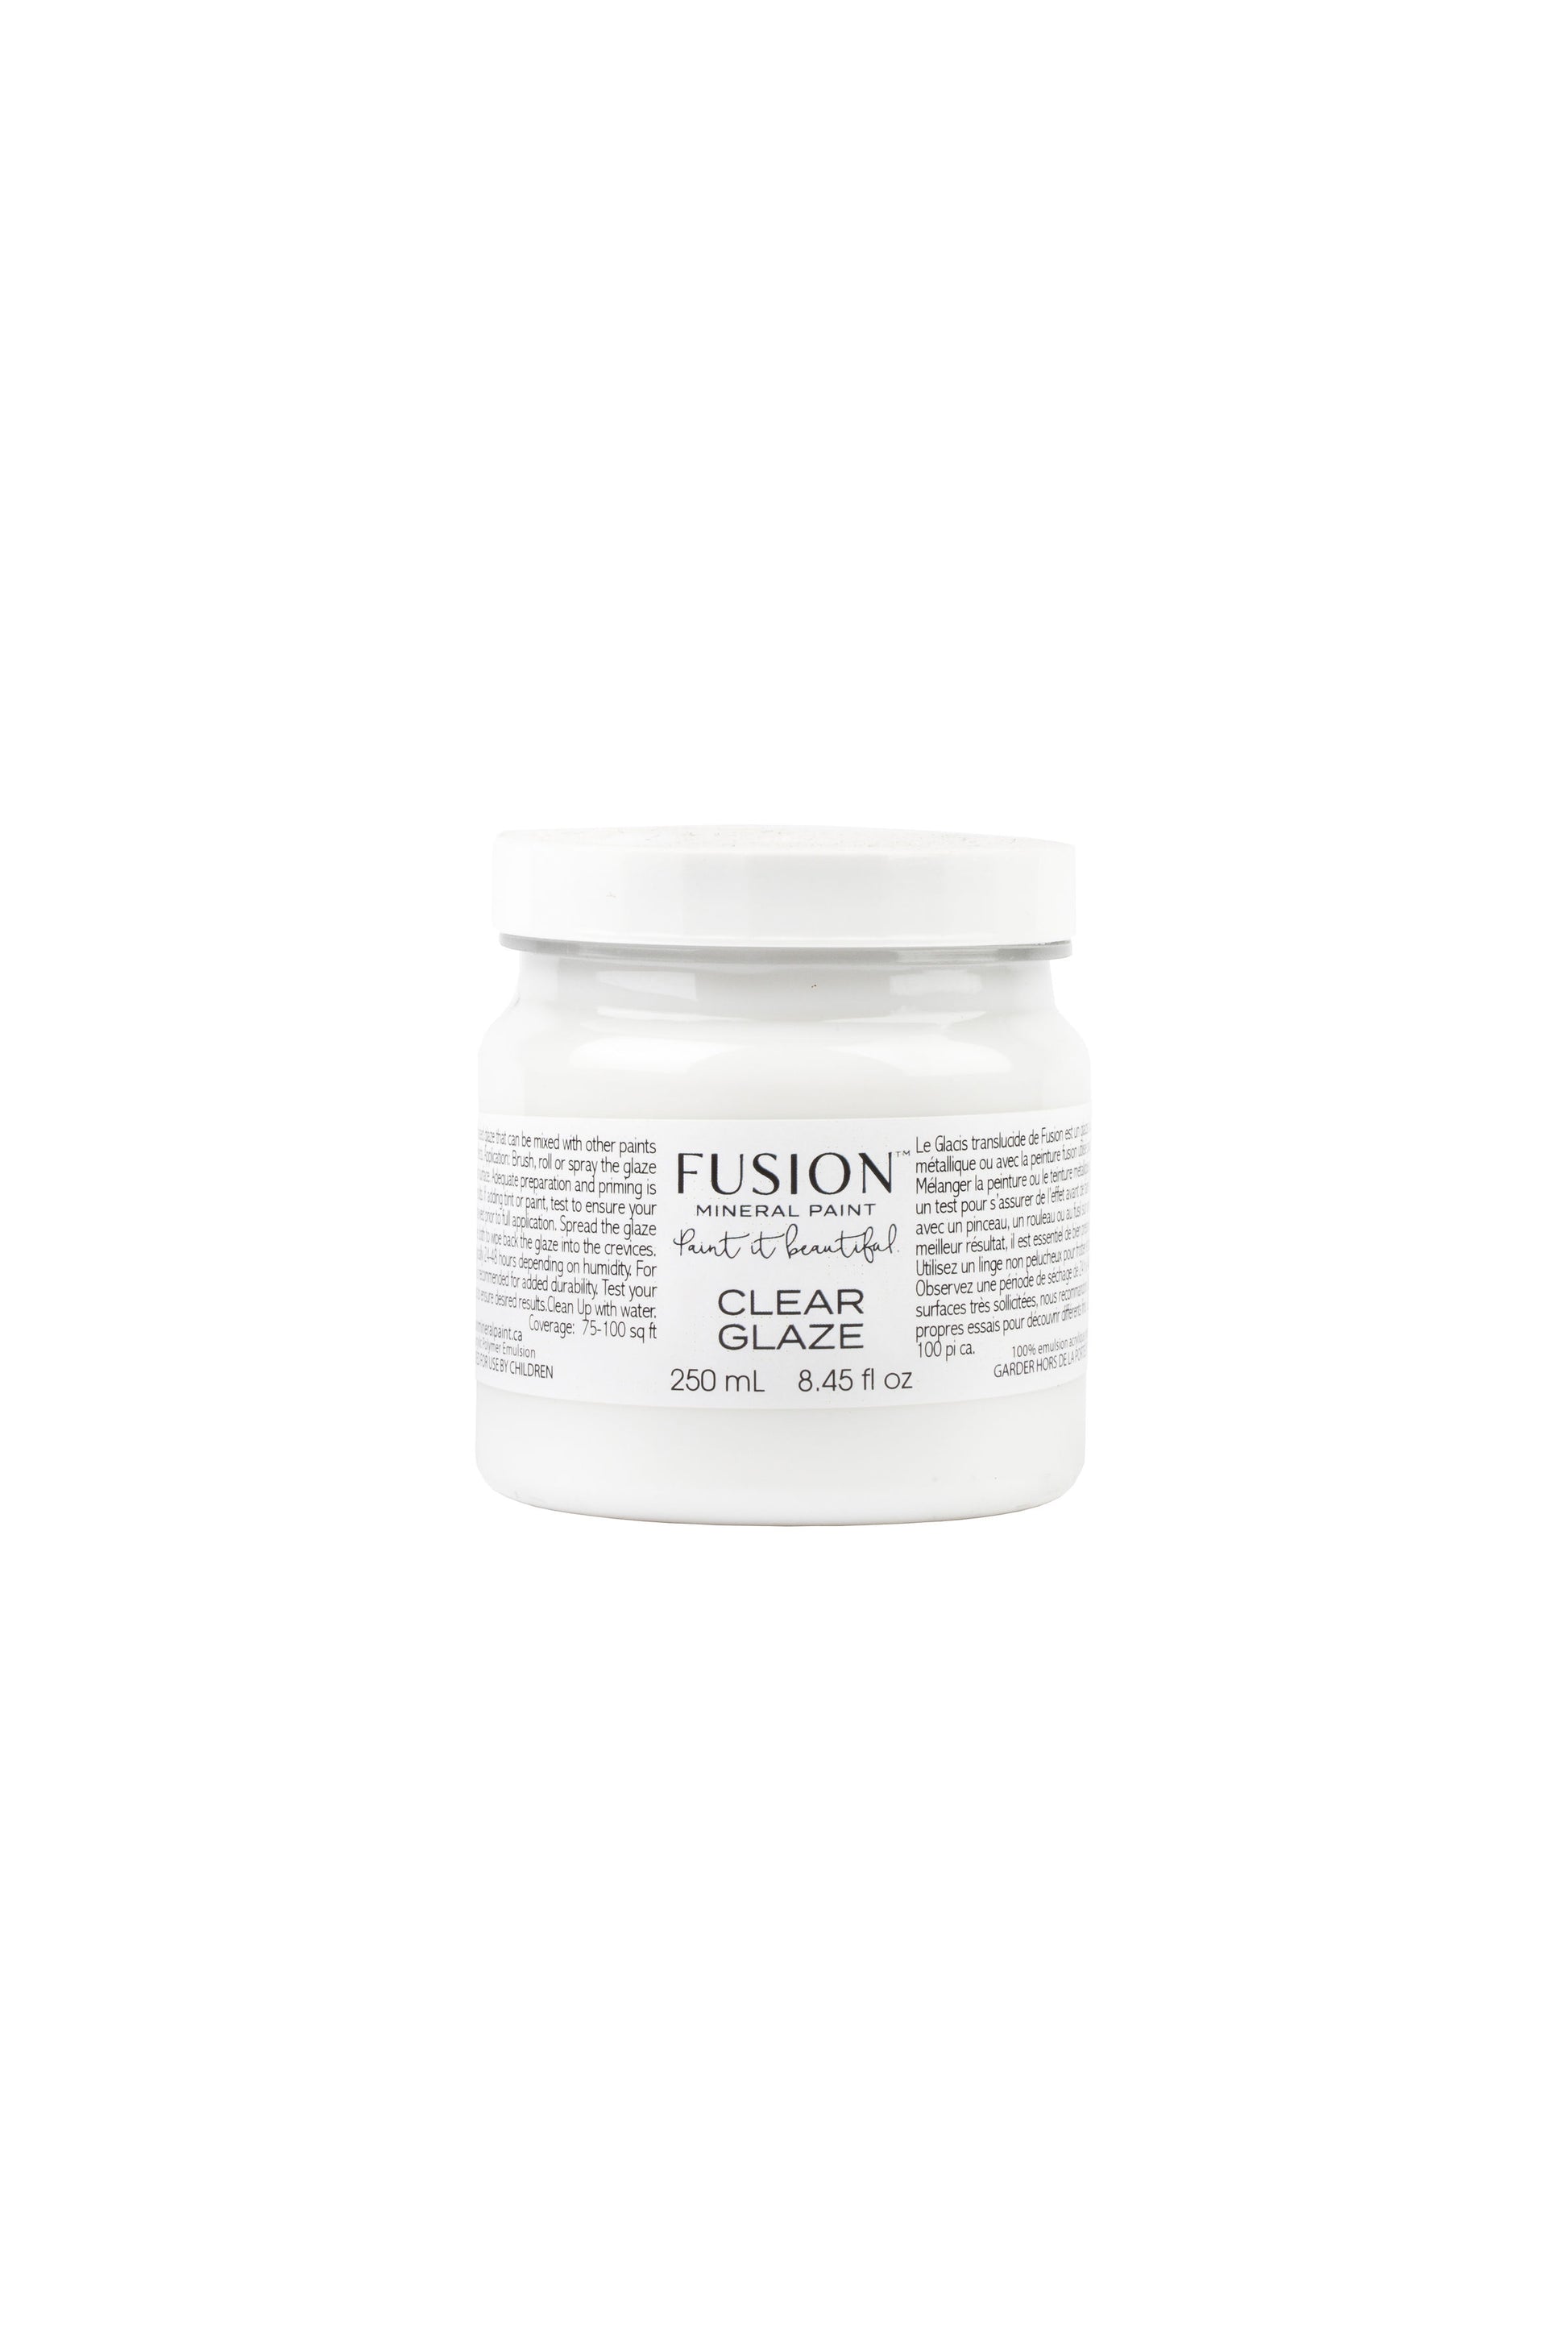 Fusion Mineral Paint, Clear Glaze - 250 ml, Old to New Furniture